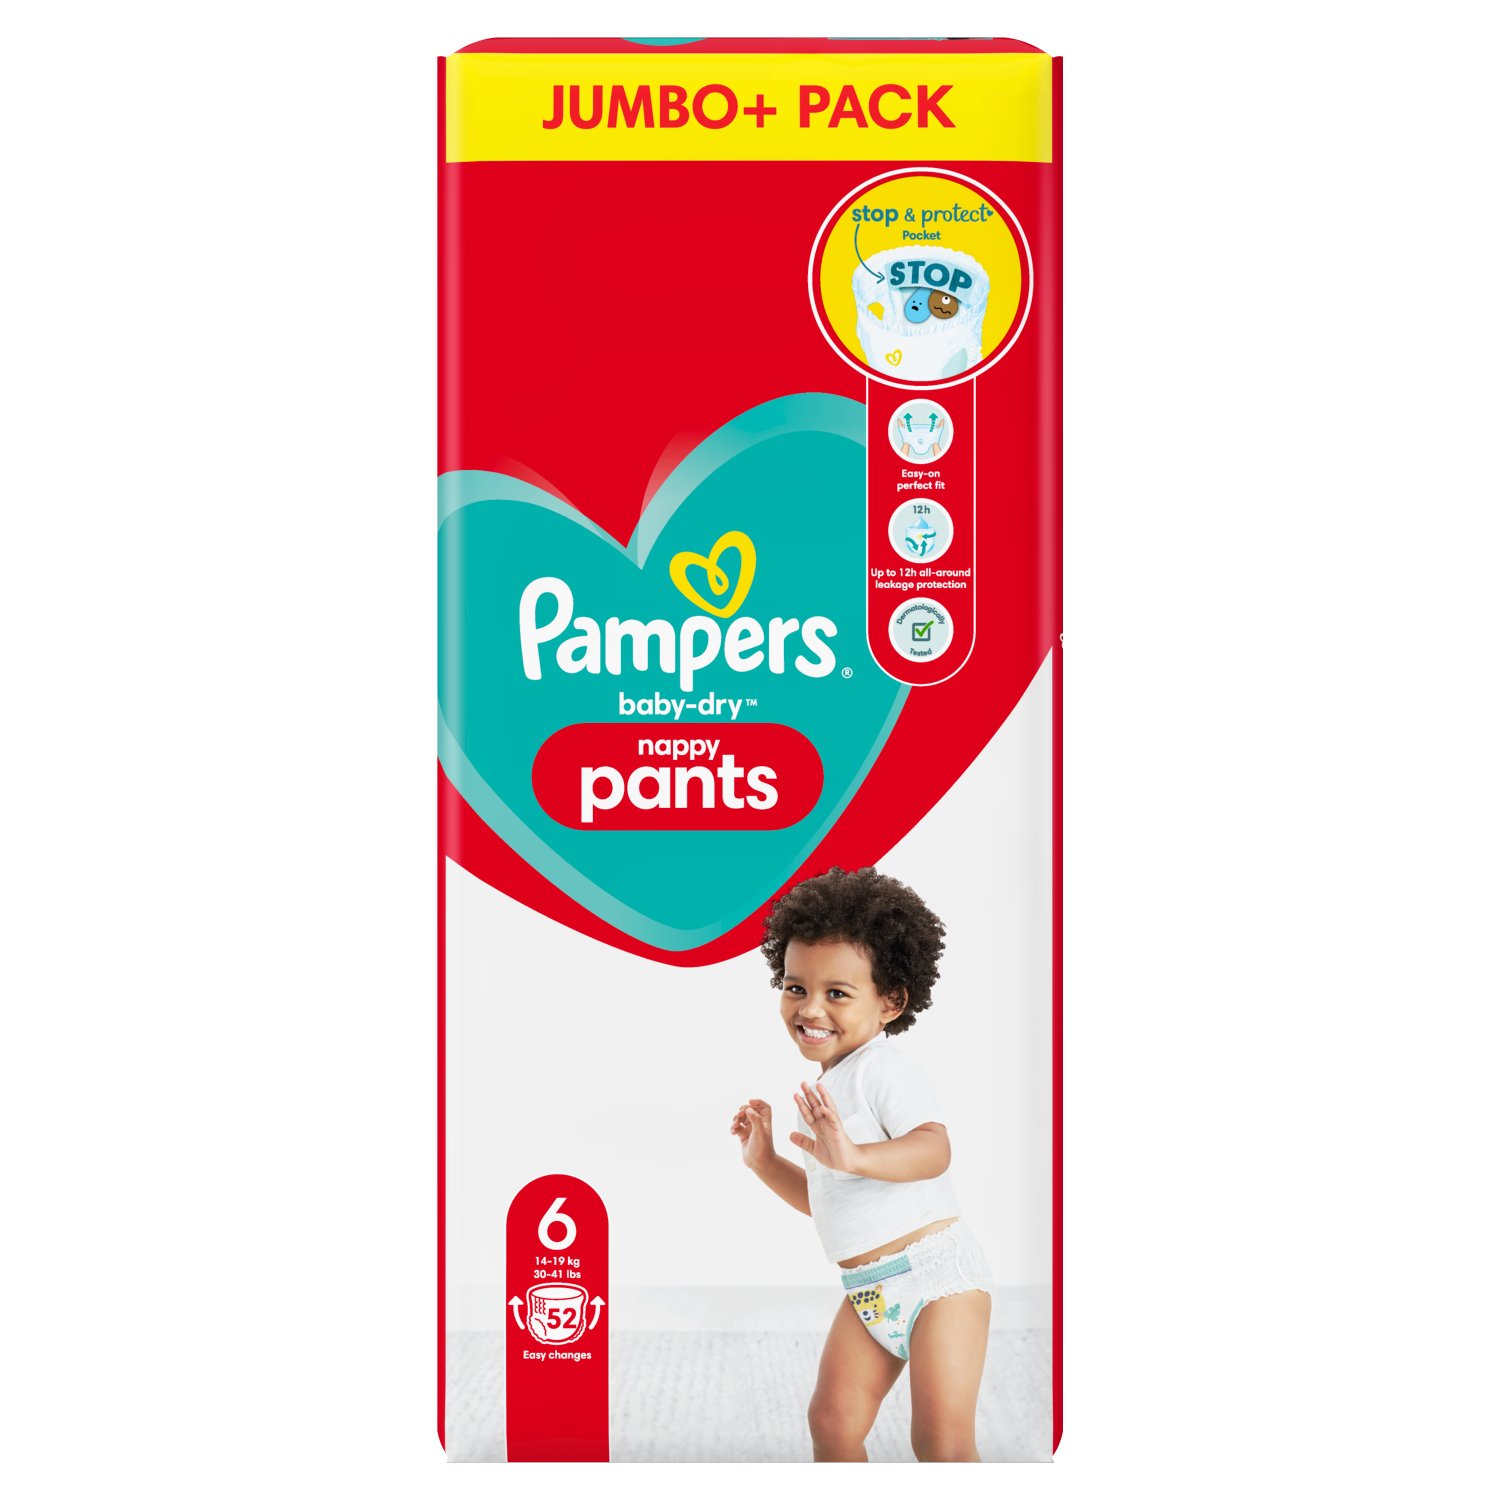 Pampers Baby-Dry Nappy Pants Size 6 Jumbo+ Pack (52 Piece)